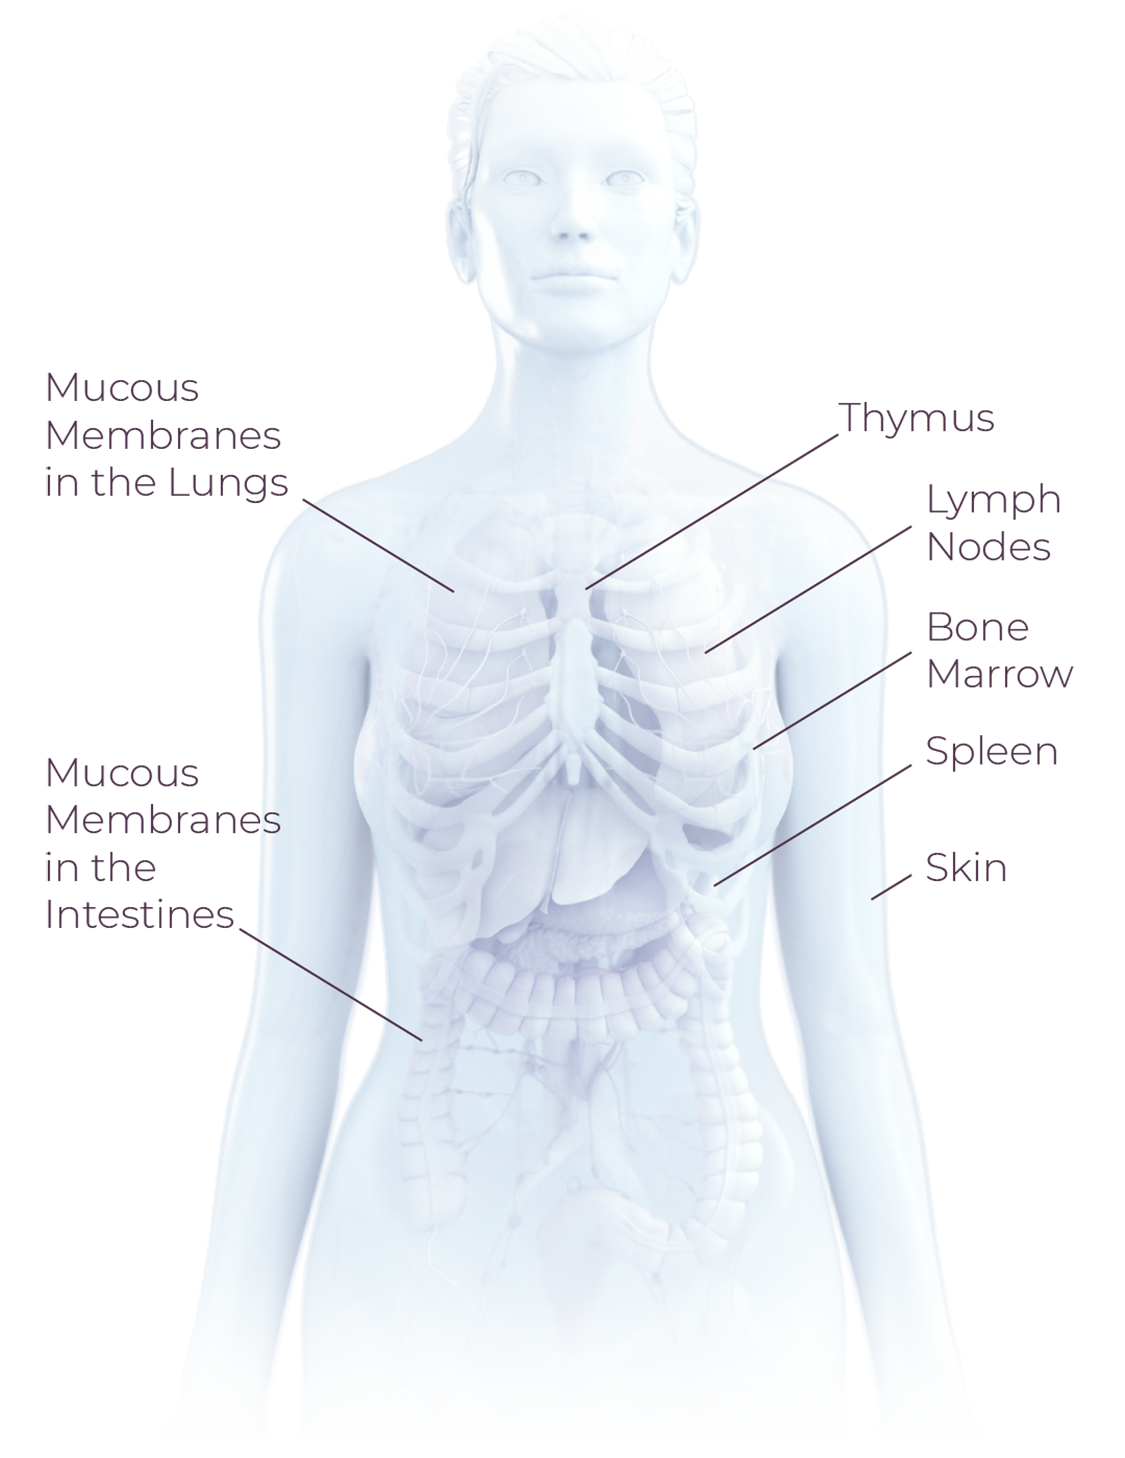 Scientific illustration of the main organs involved in the immune system. Clockwise: thymus, lymph nodes, bone marrow, spleen, skin, mucous membranes in the intestines, mucous membranes in the lungs.